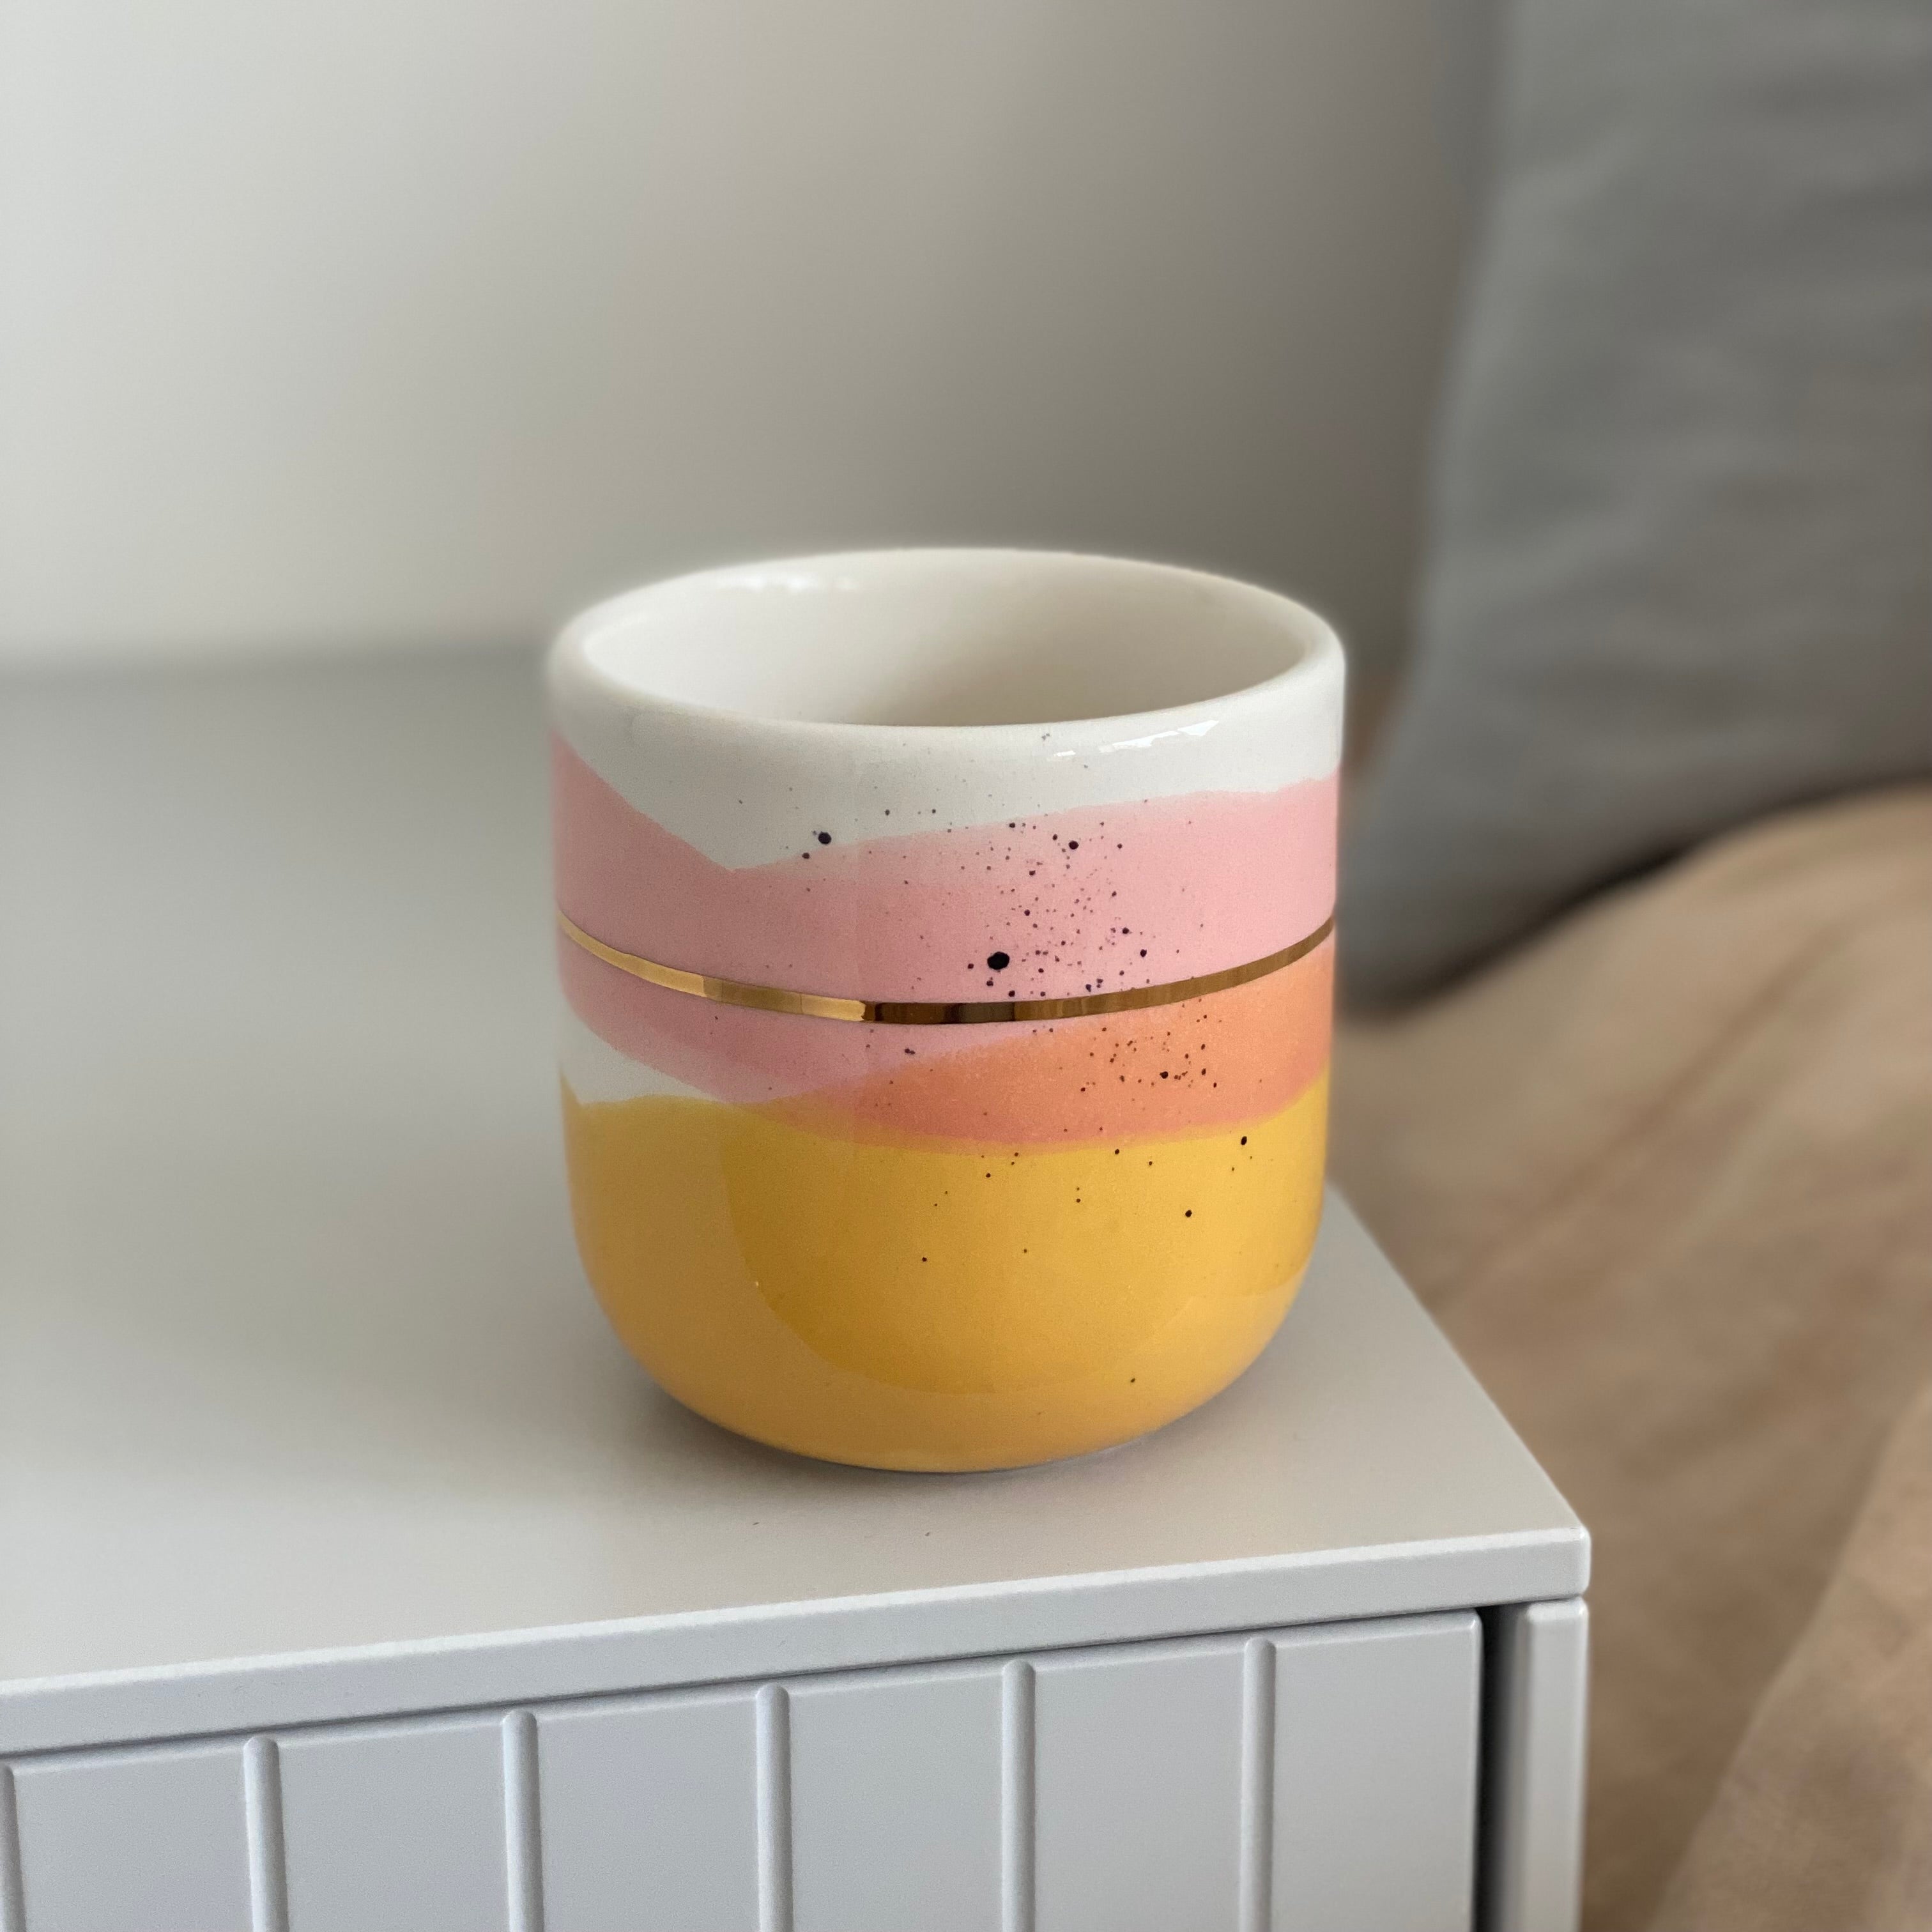 Marinski Heartmade latte cup Landscape - warm yellow and coral pink